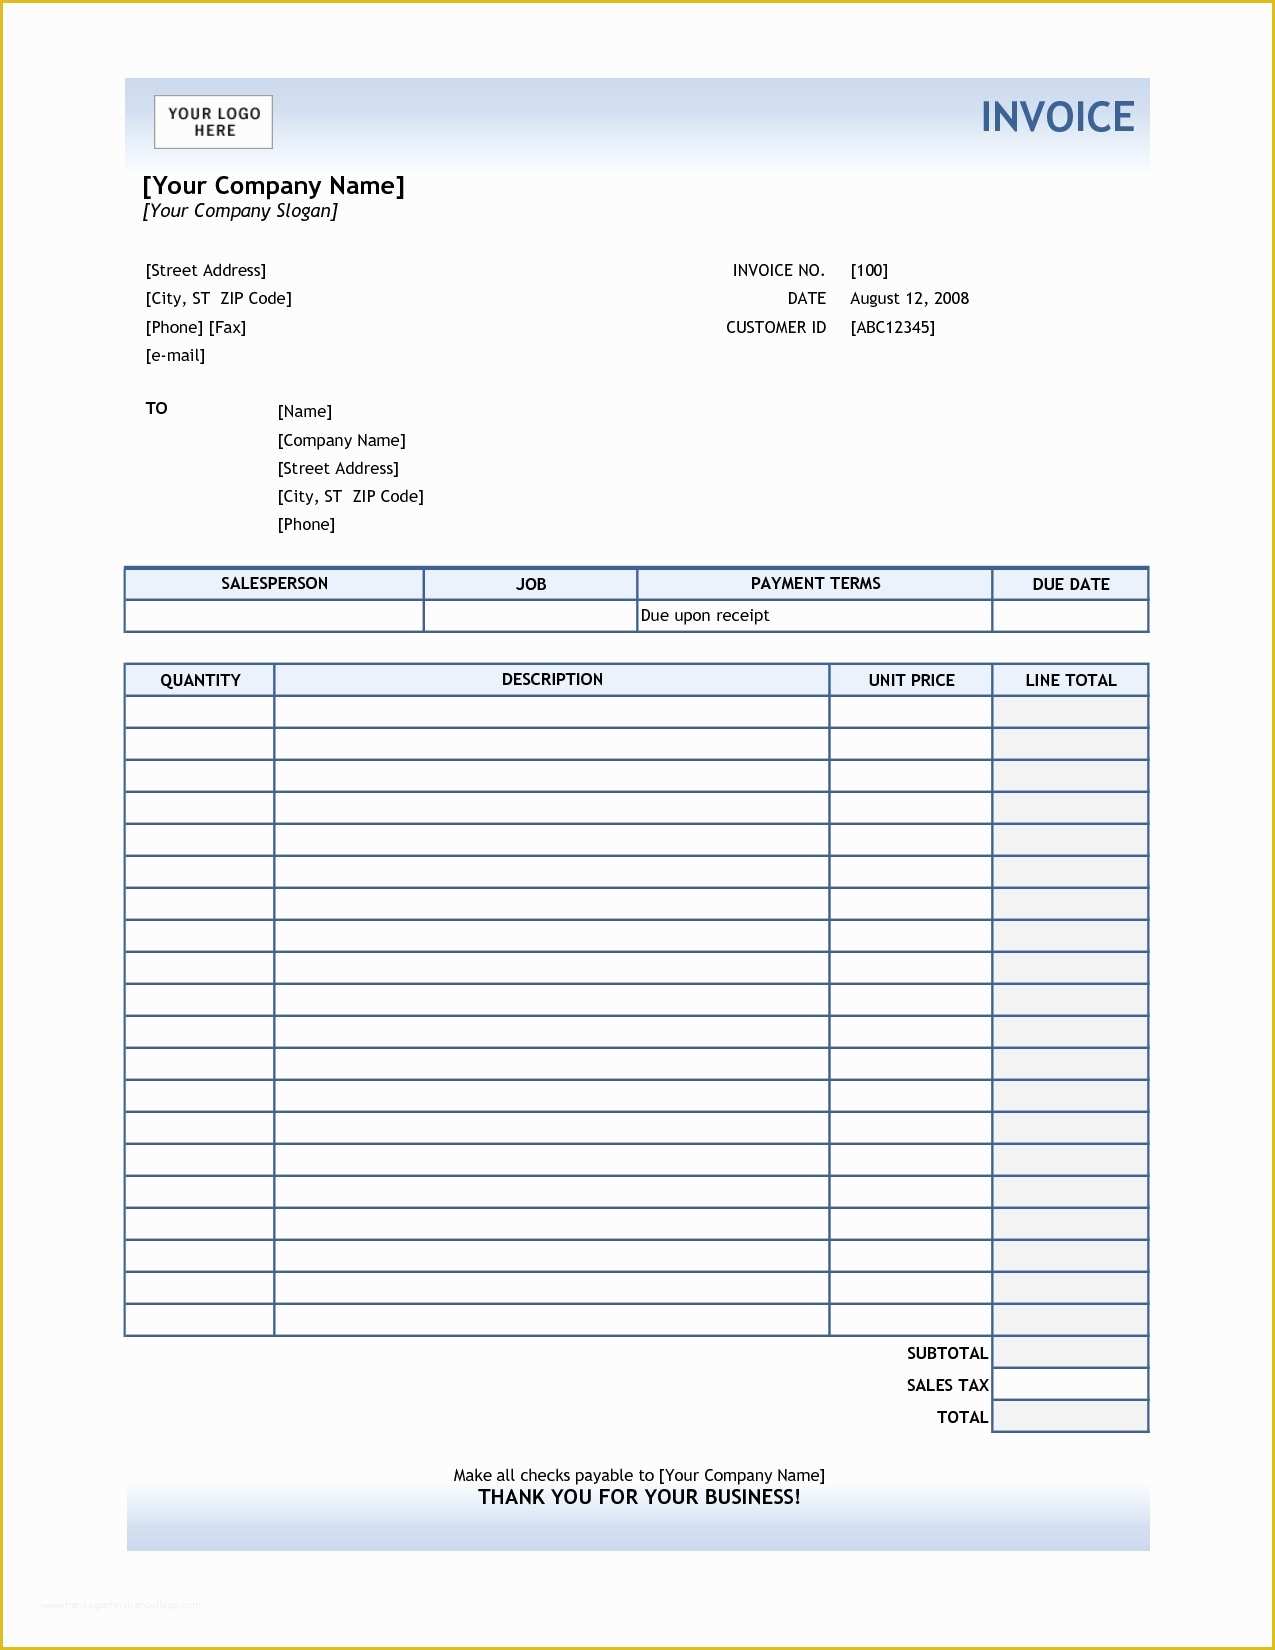 Free Company Invoice Template Of Business Invoice Template Excel Invoice Template Ideas